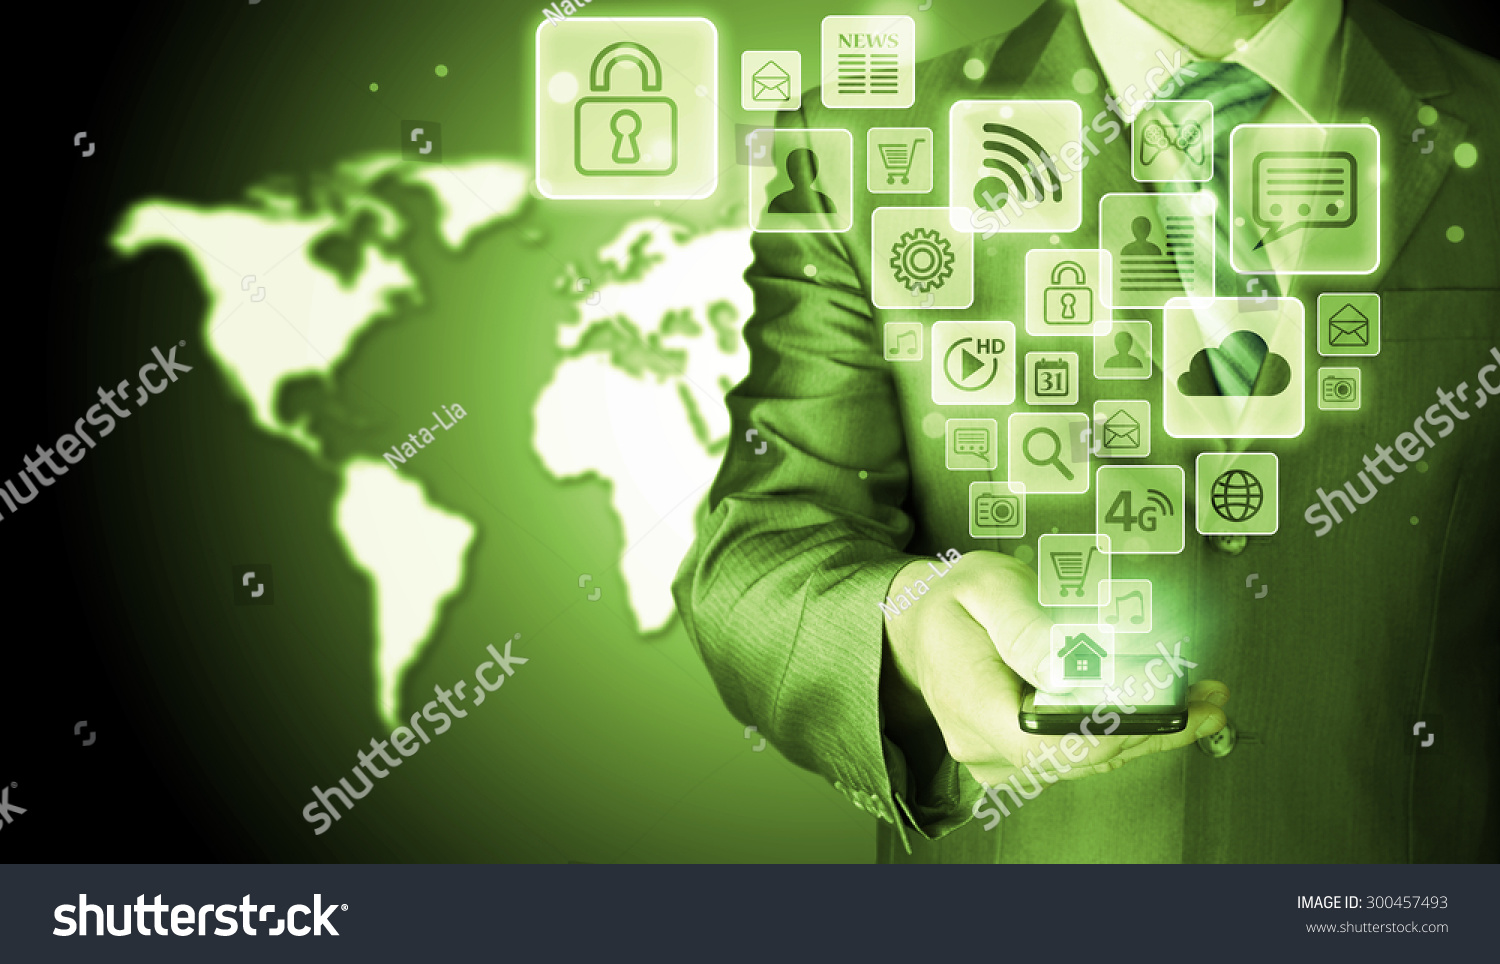 Business man using smart phone with social media icon set #300457493